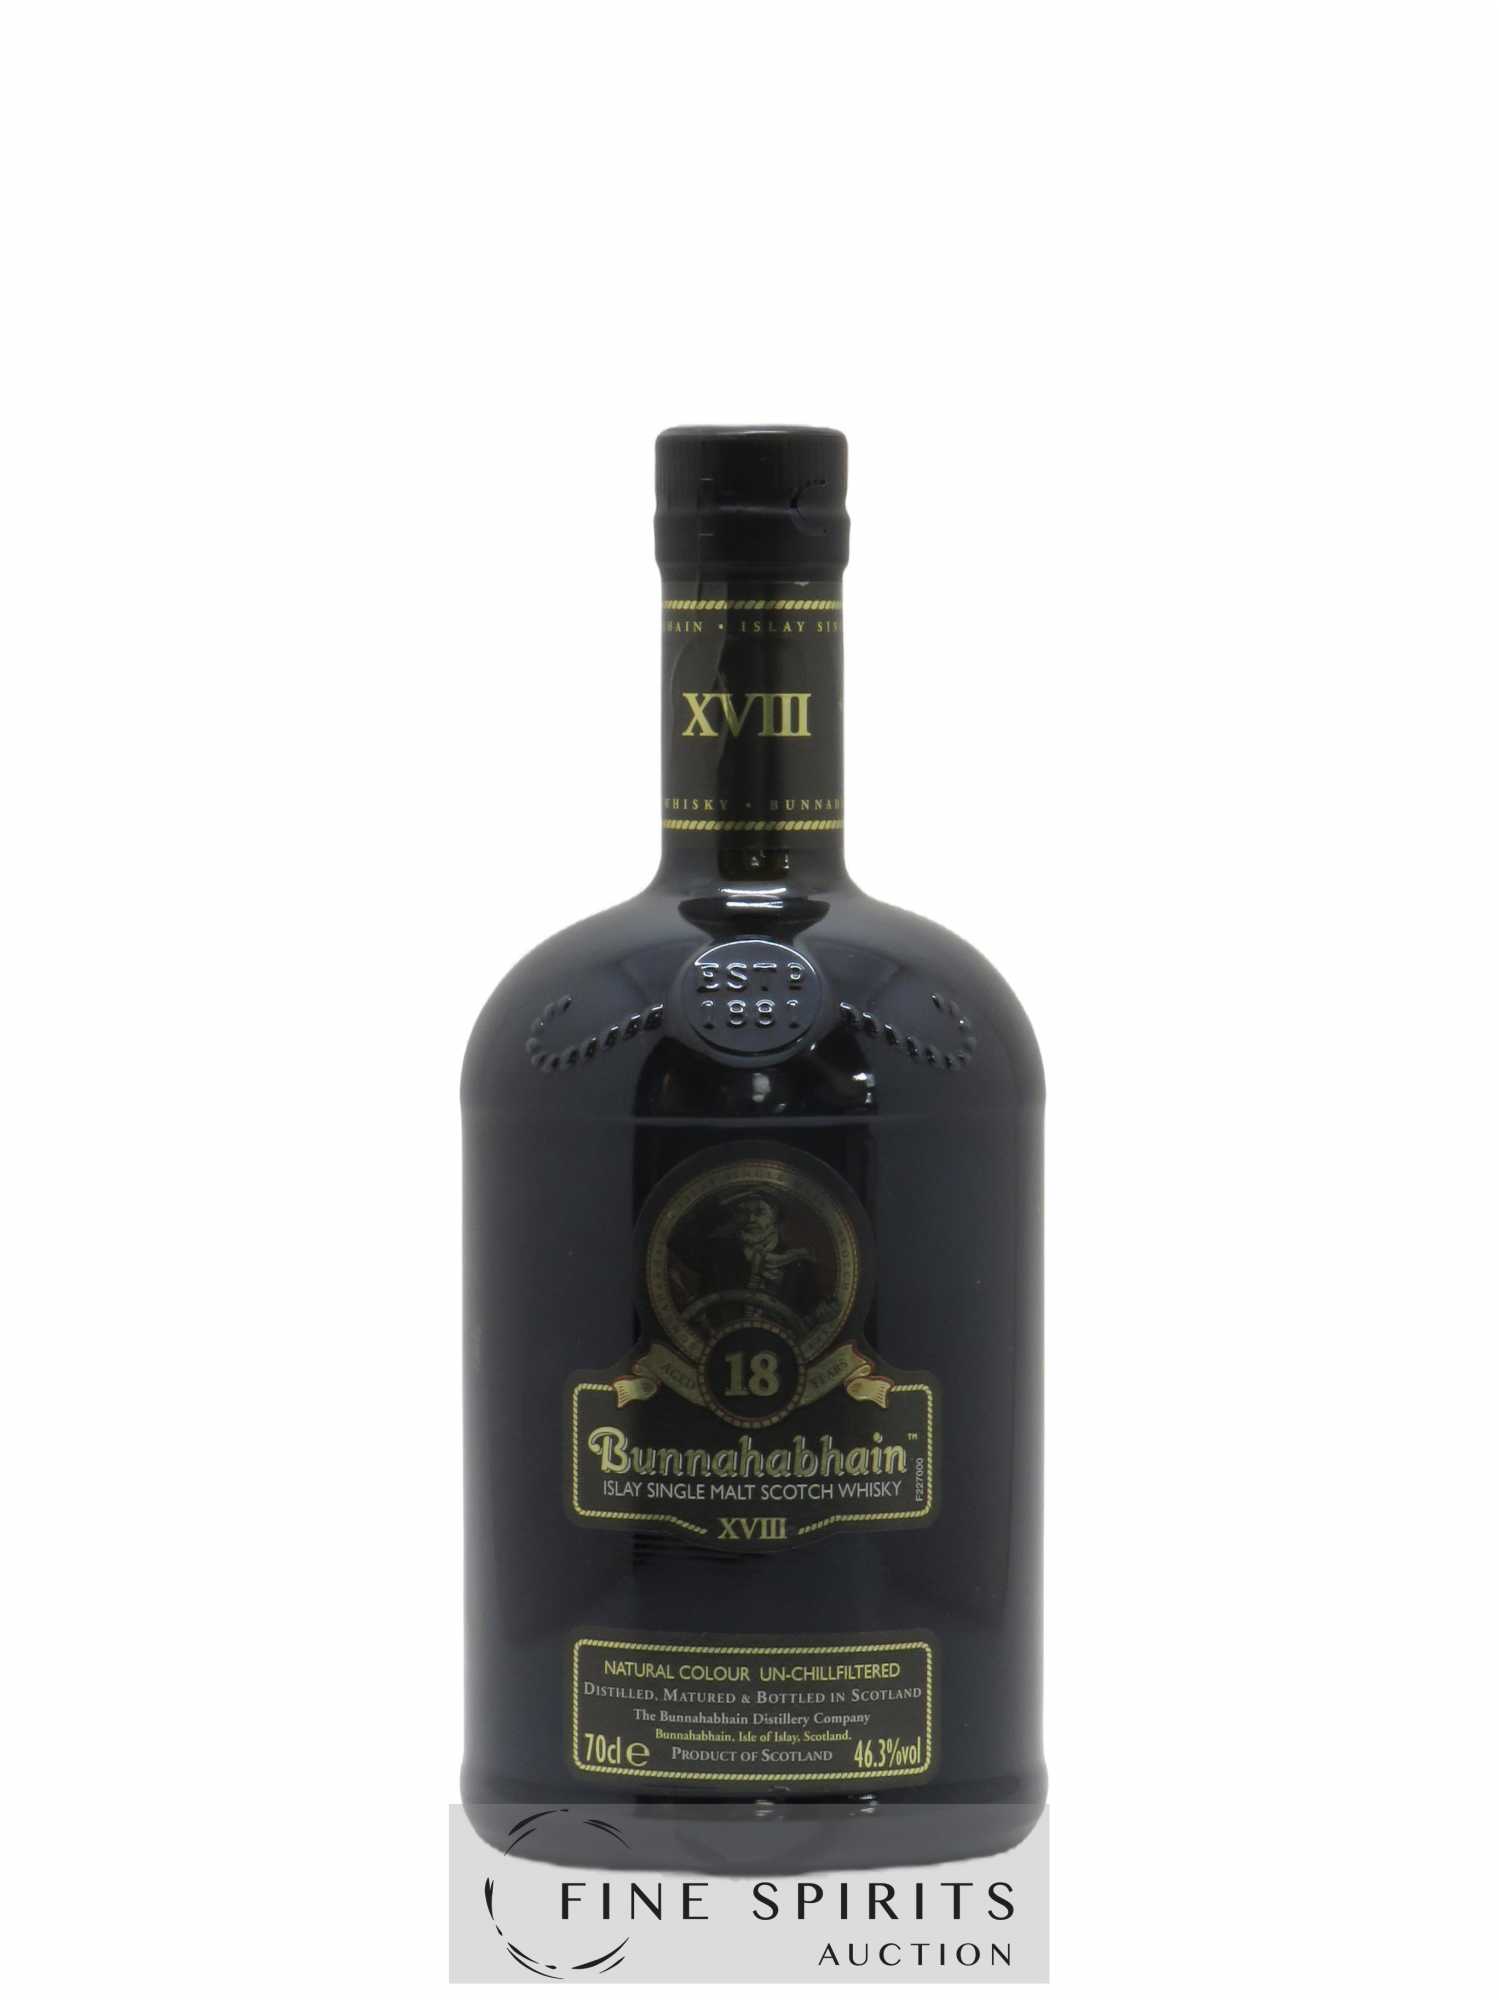 Bunnahabhain 18 years Of. Natural Colour Un-Chillfiltered